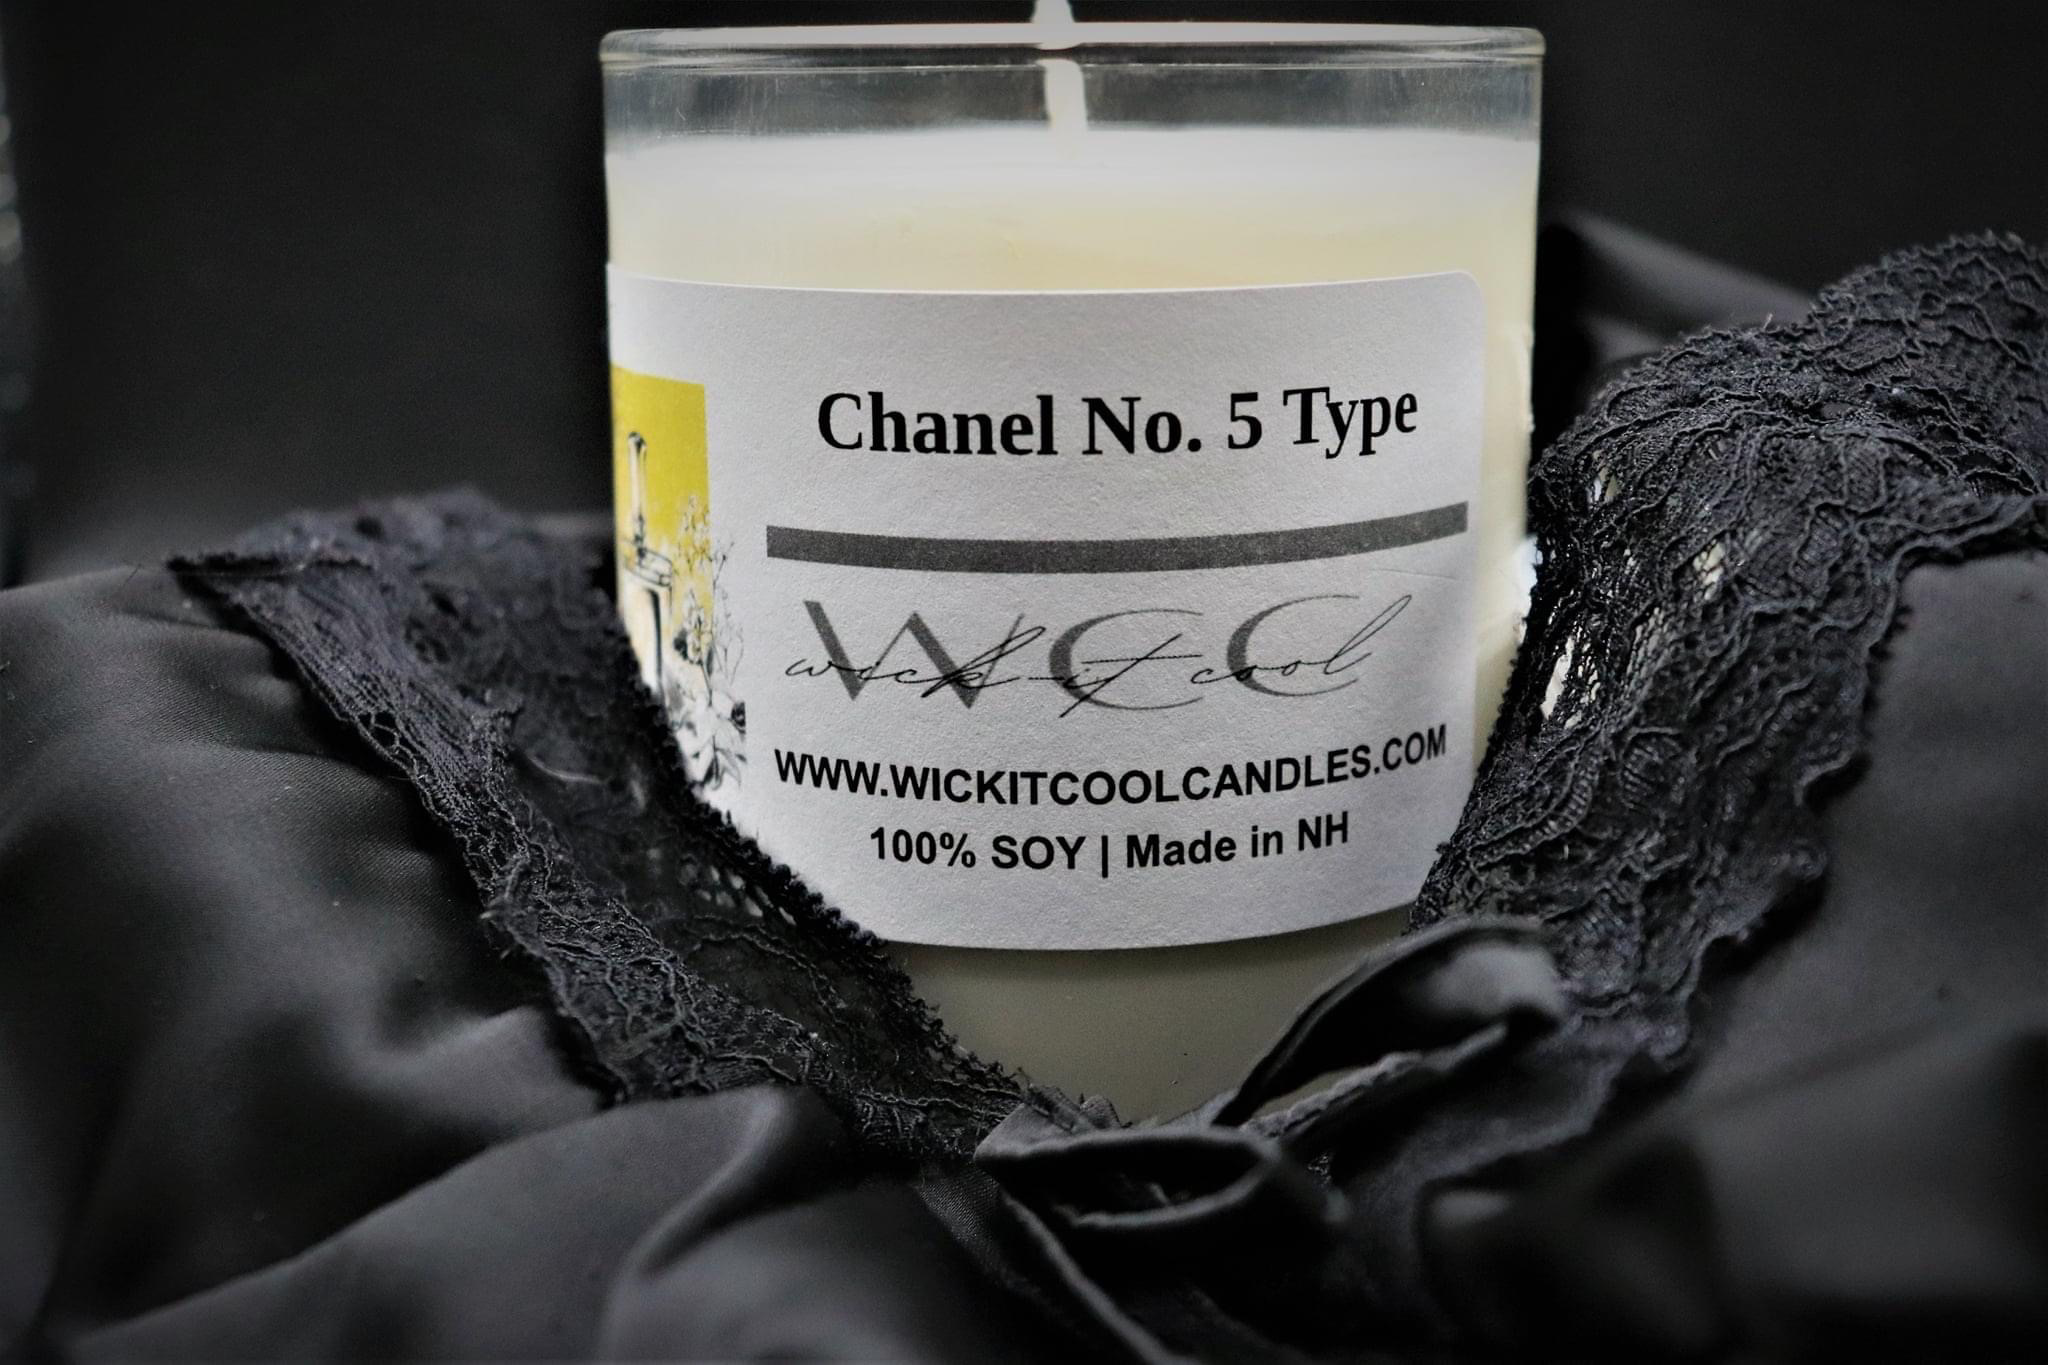 Chanel No. 5 type